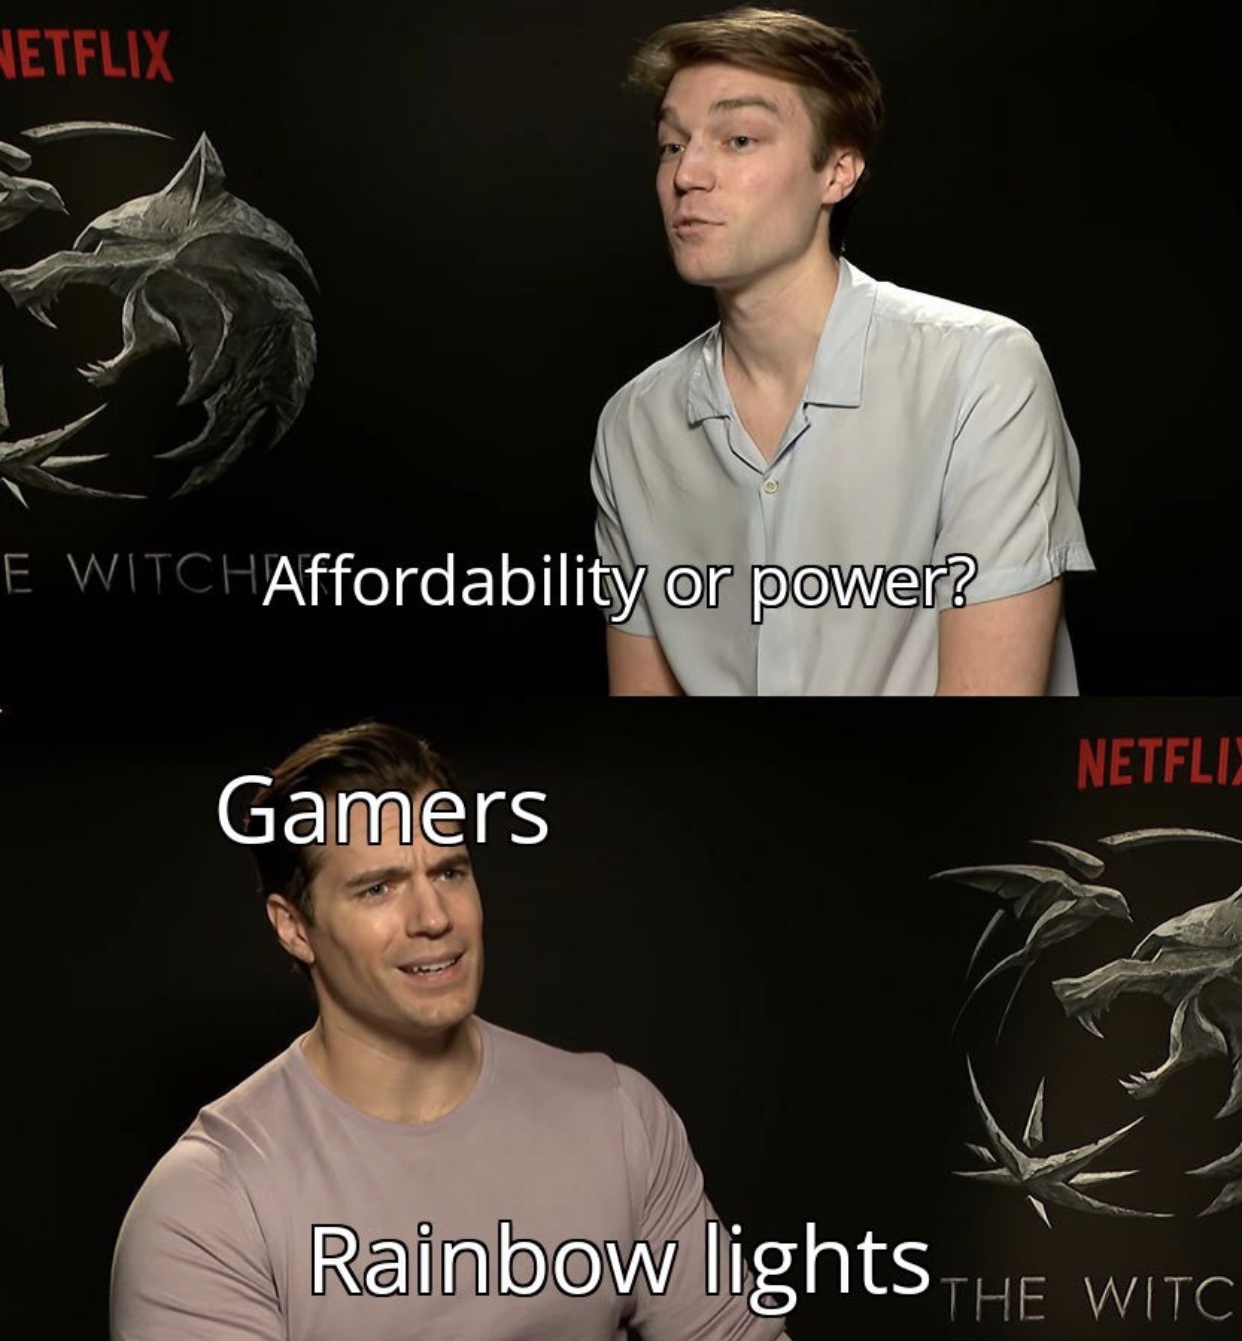 funny memes and tweets - henry cavill meme - Ietflix E WITCHAffordability or power? Netflt. Gamers Rainbow lights The Witc